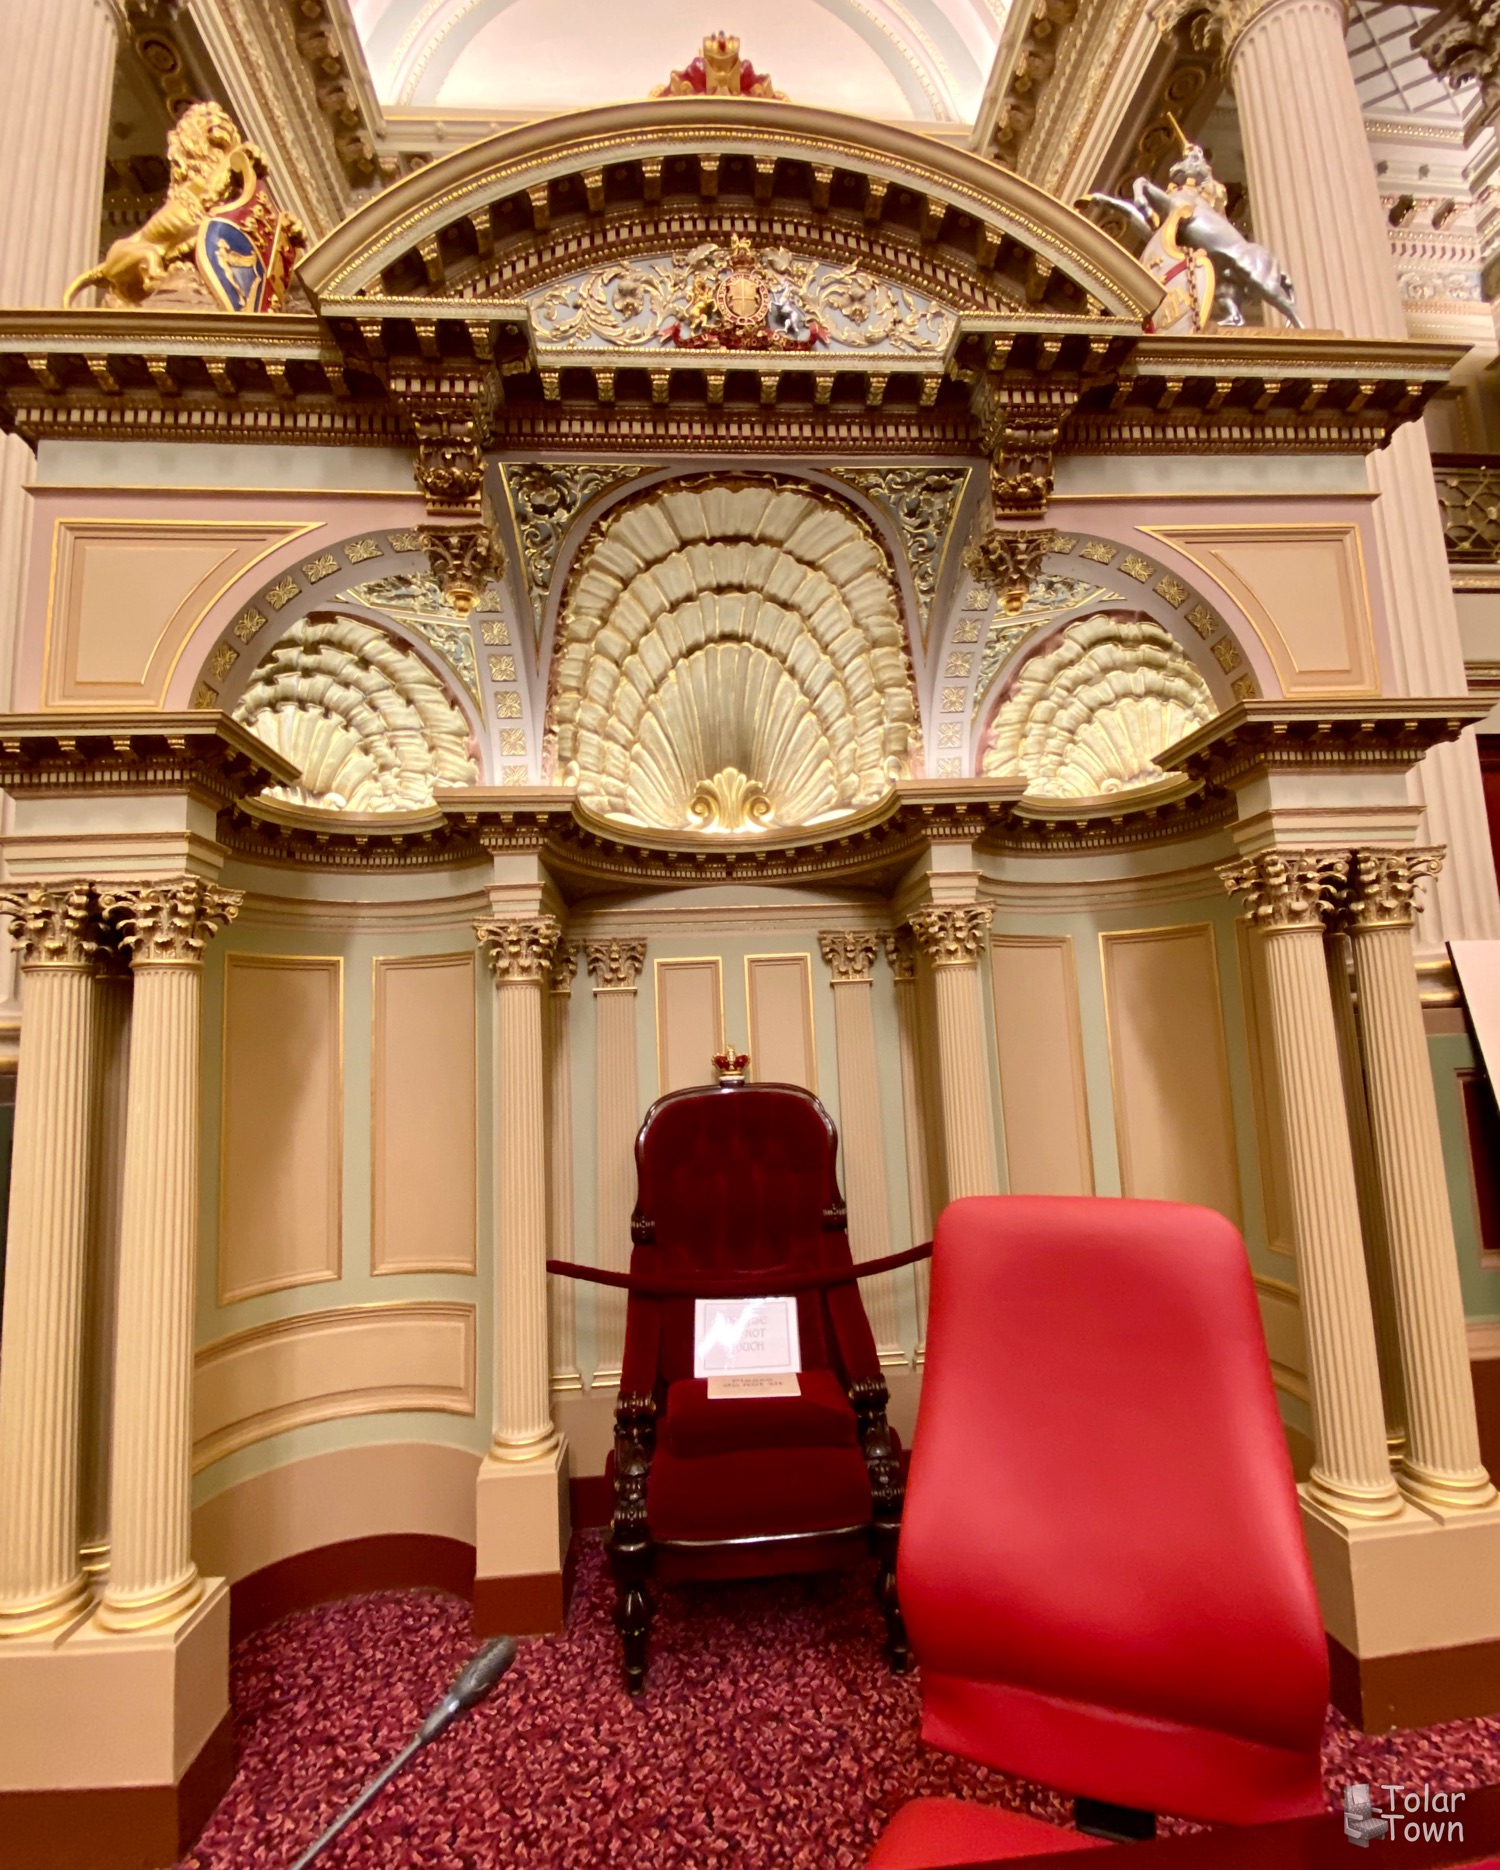 Parliament: the Queen's seat